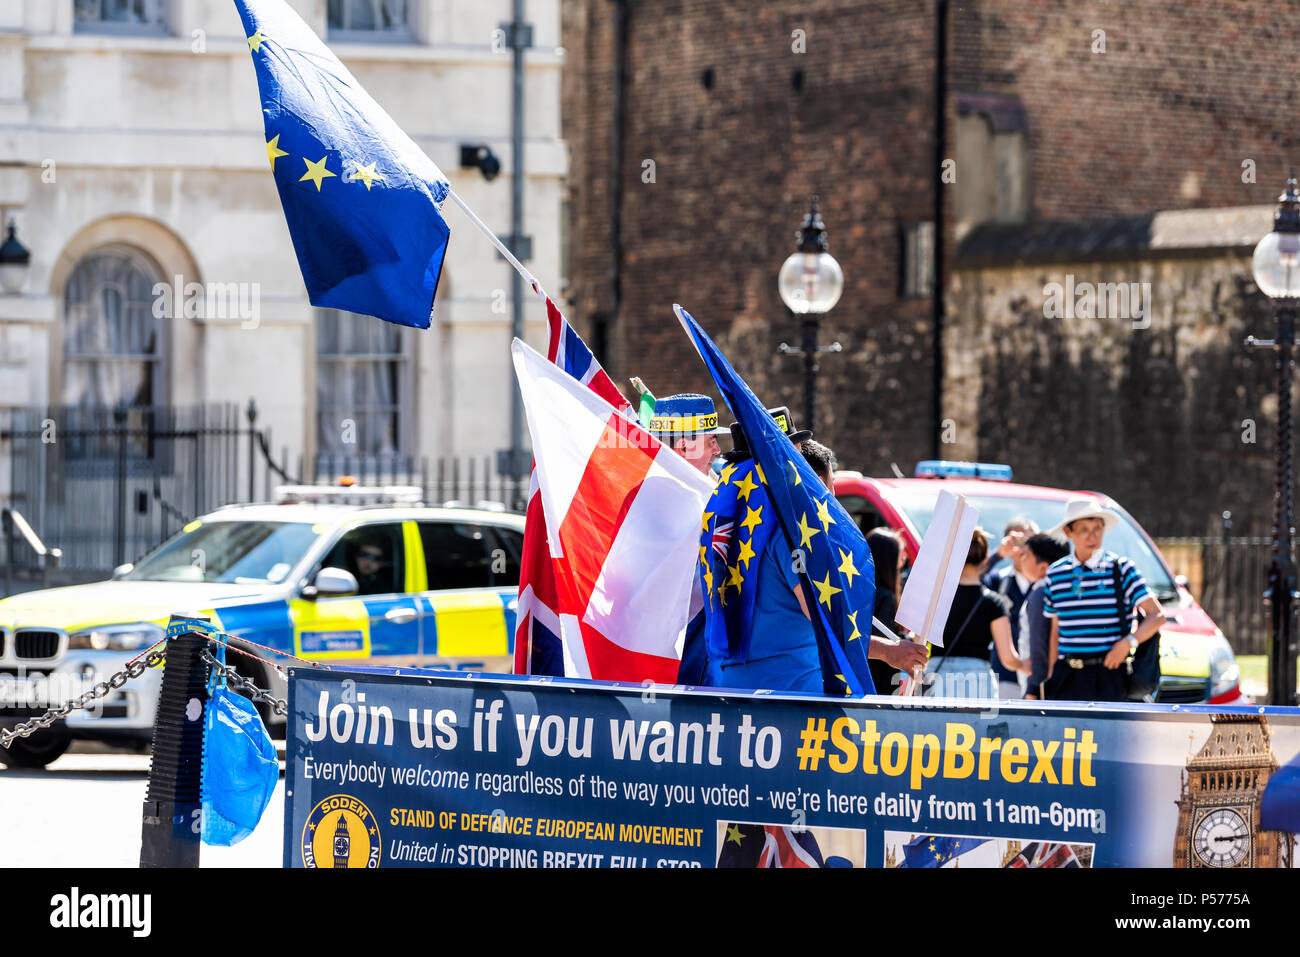 London, United Kingdom - June 25, 2018: People, EU European Union blue flags at anti Brexit protest in UK England by Westminster with signs for stop, stopbrexit politics Credit: Kristina Blokhin/Alamy Live News Stock Photo